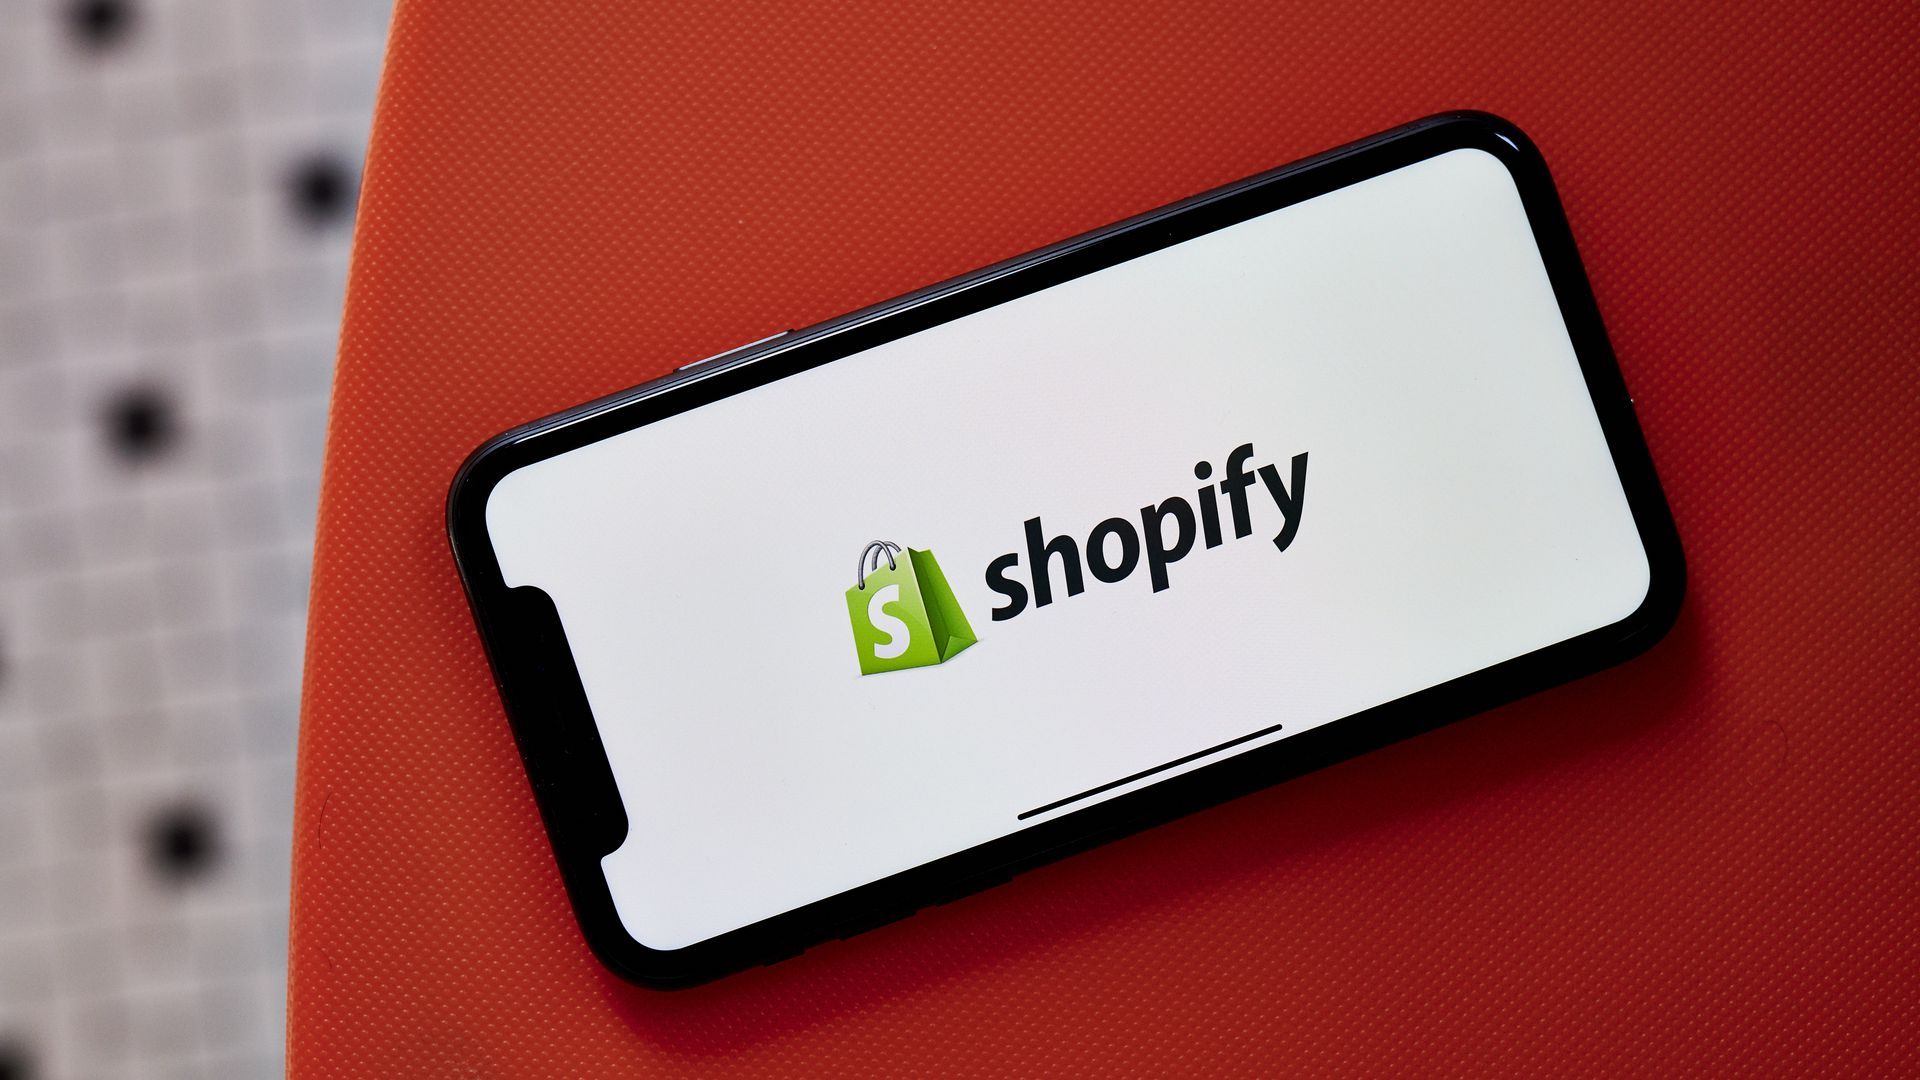 The Shopify logo, a green shopping bag with the letter S spelled in white, appears on a white background on a touchscreen mobile phone.